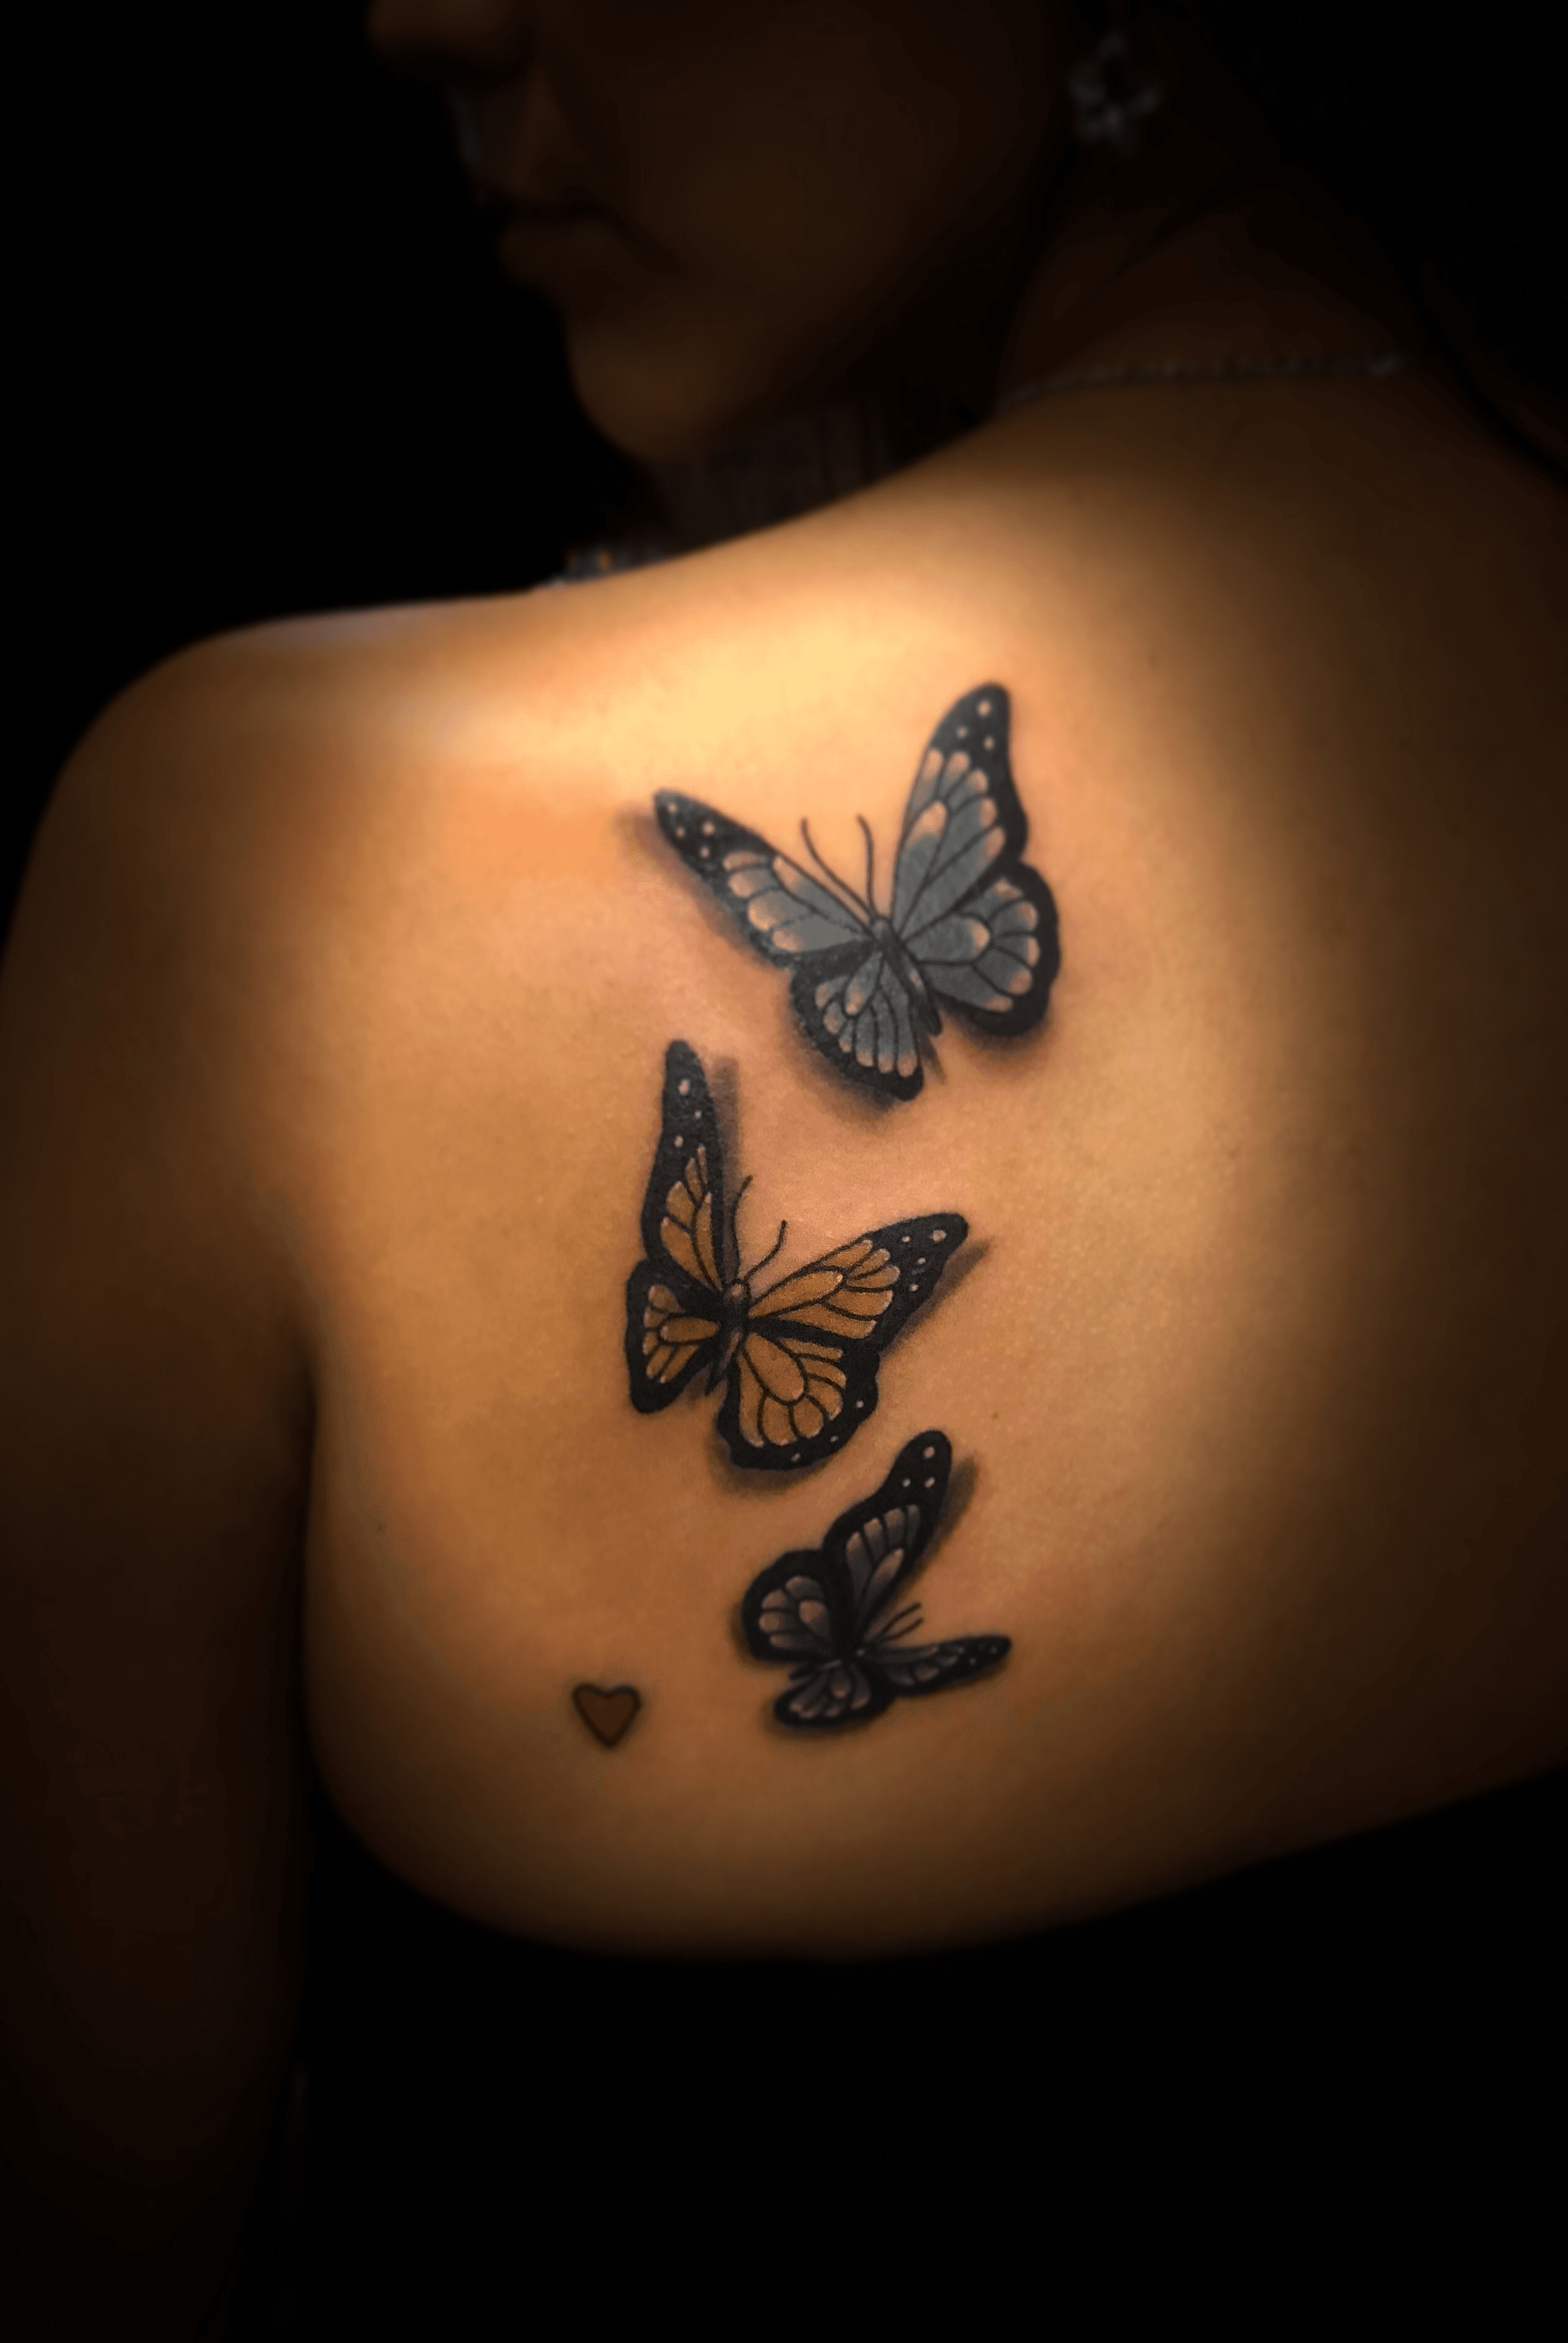 Tattoo uploaded by Tattoodo  Butterfly tattoo by Nina Chwelos NinaChwelos  butterflytattoo butterflytattoos butterfly moth wings insect nature  matching friendtattoo coupletattoo linework matchingtattoo shoulder  blackandgrey illustrative 